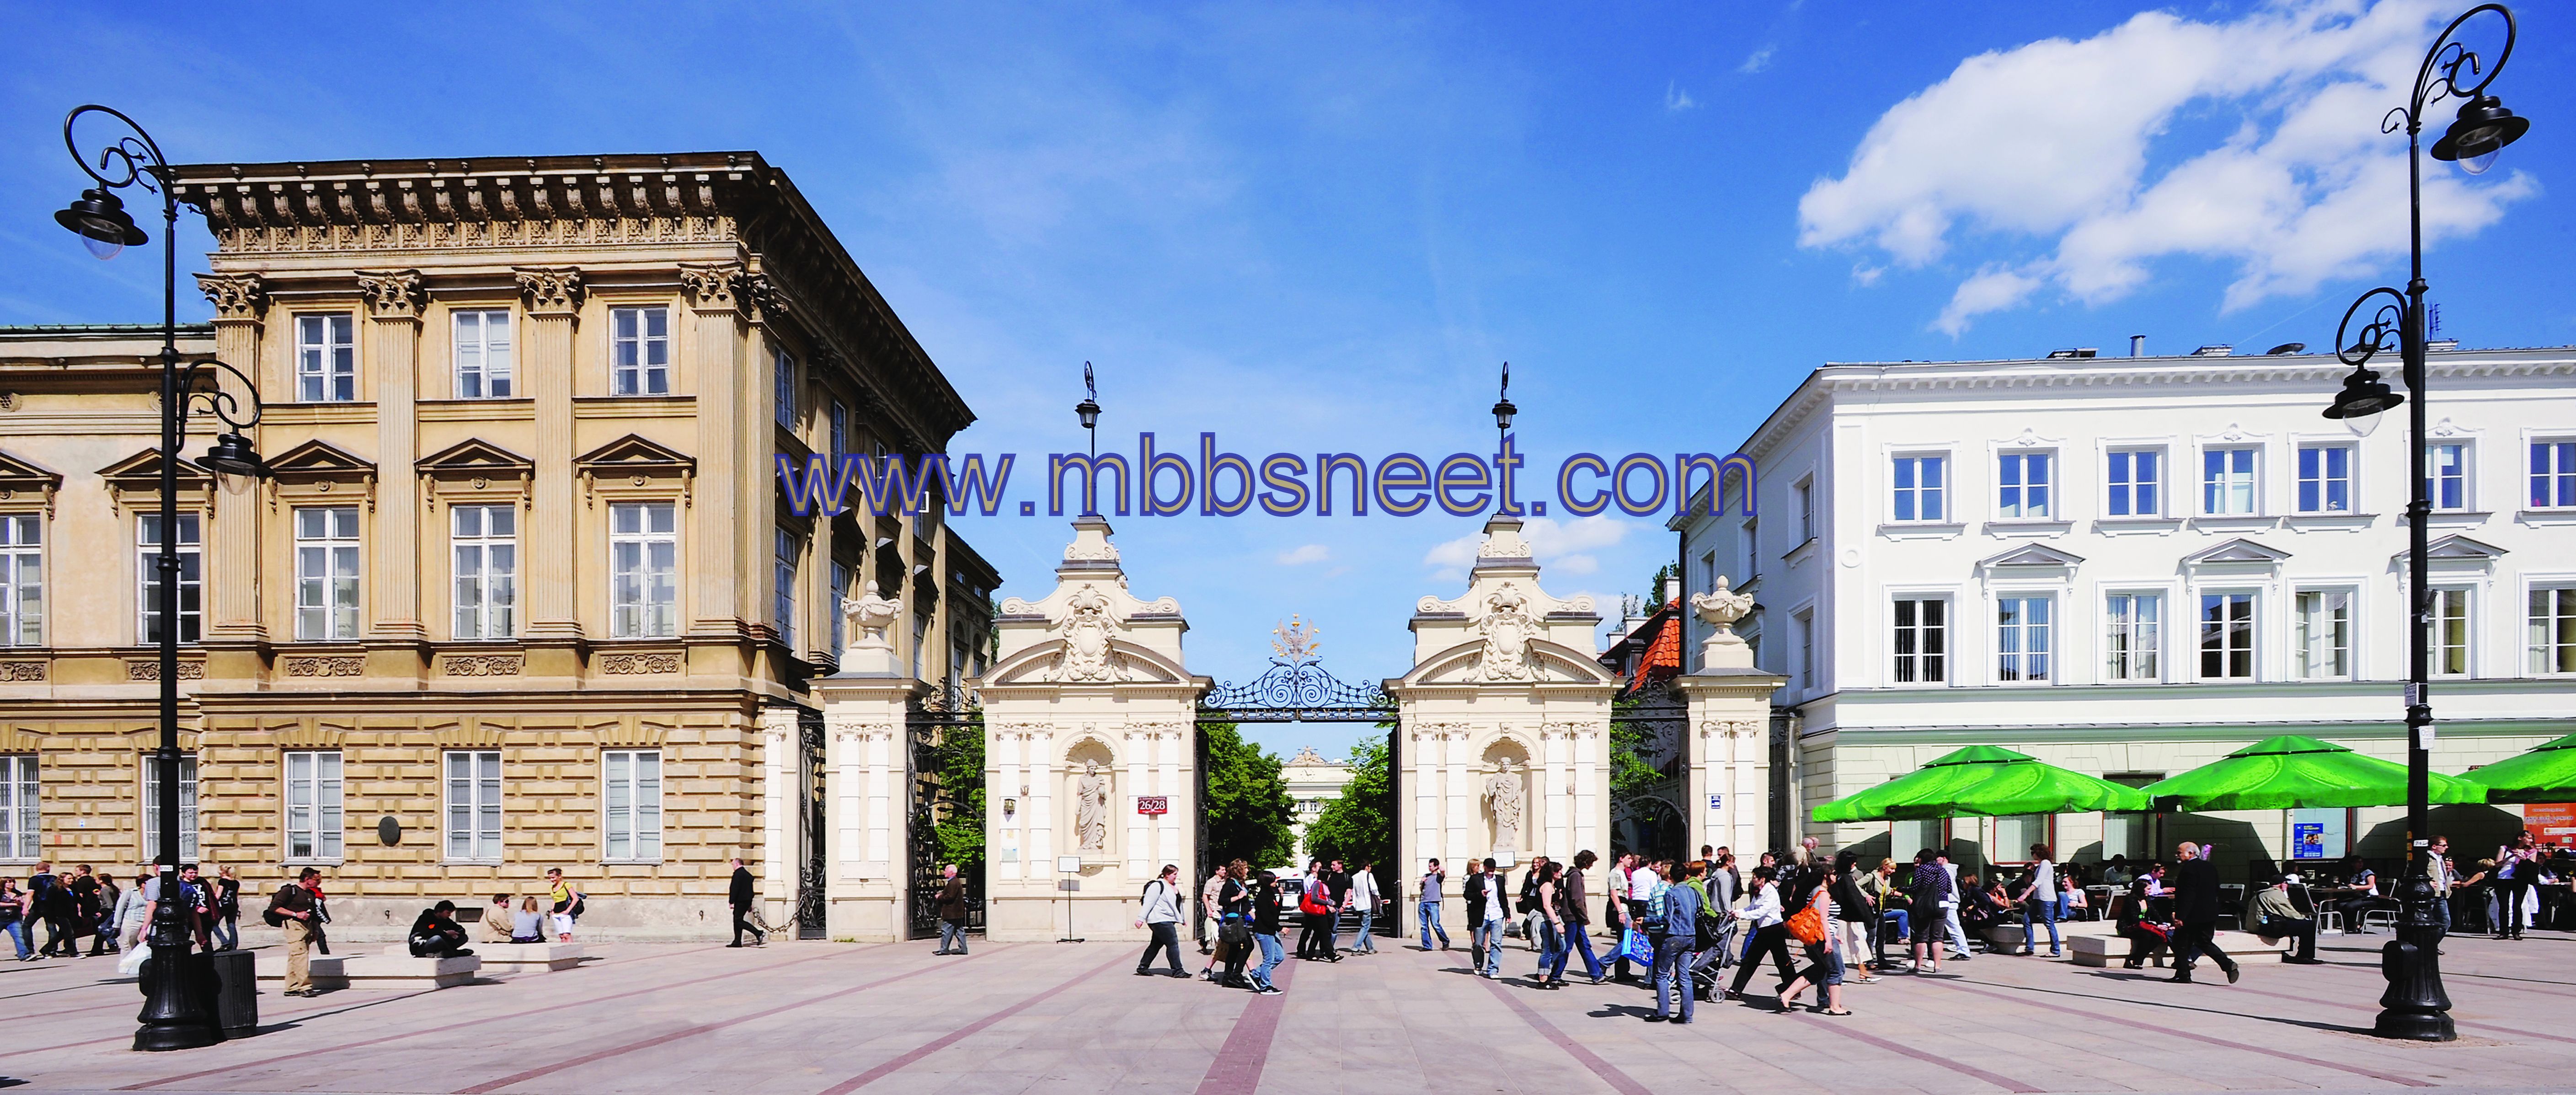 medical-university-of-warsaw-1-mbbs-admission-process-2019